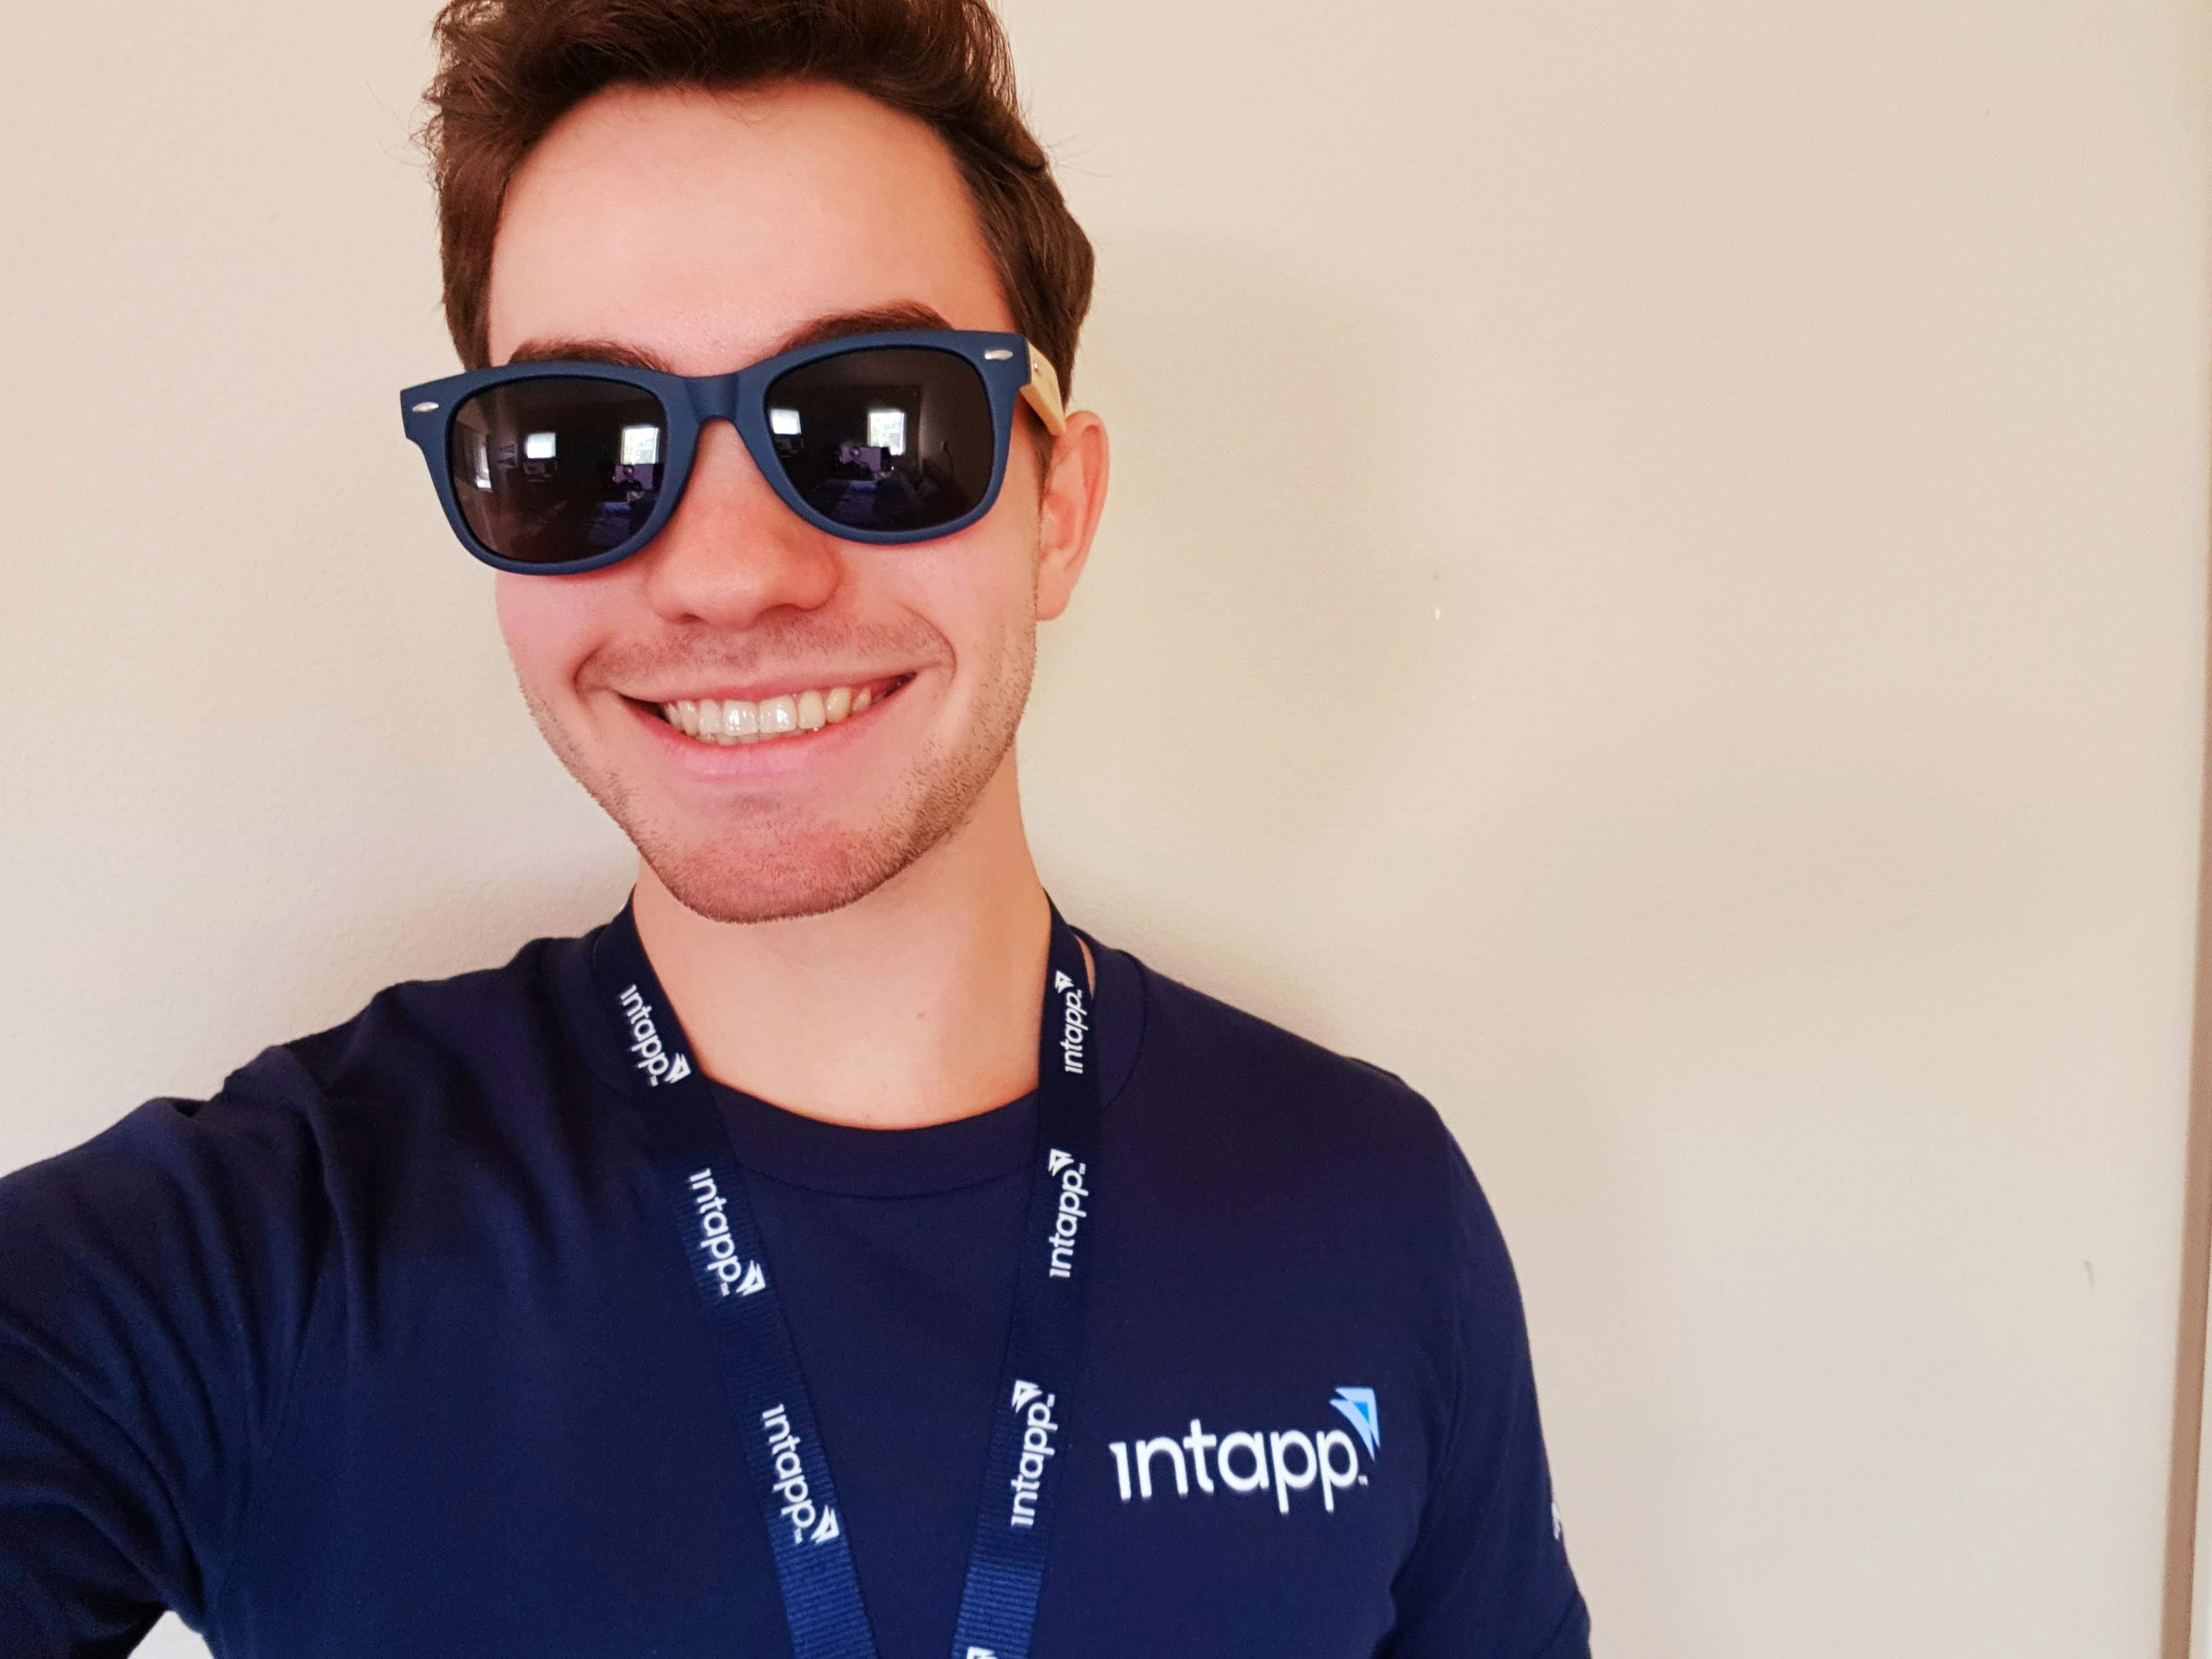 student jonathan gelfman poses wearing a branded t-shirt and sunglasses from his company, Intapp